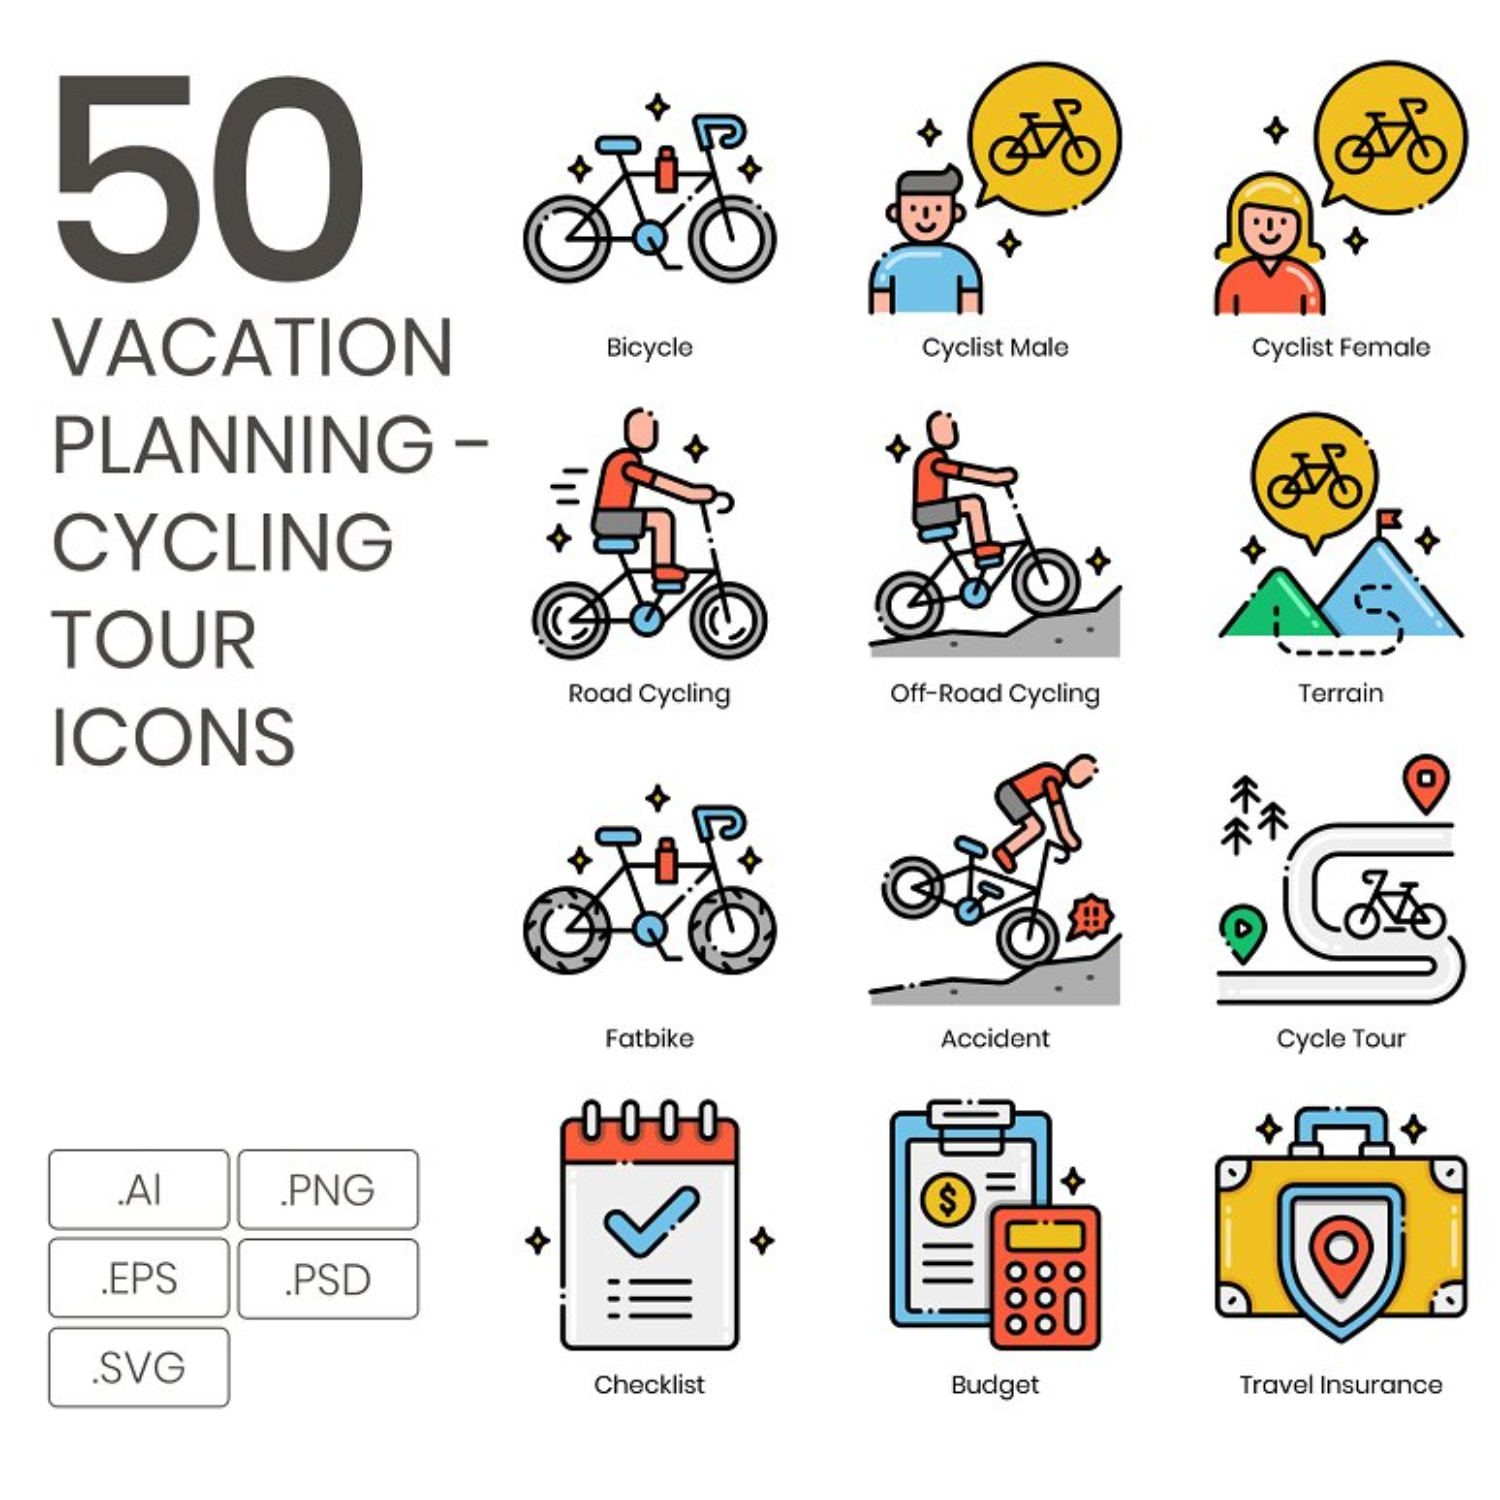 50 Vacation Planning - Cycling Tour.